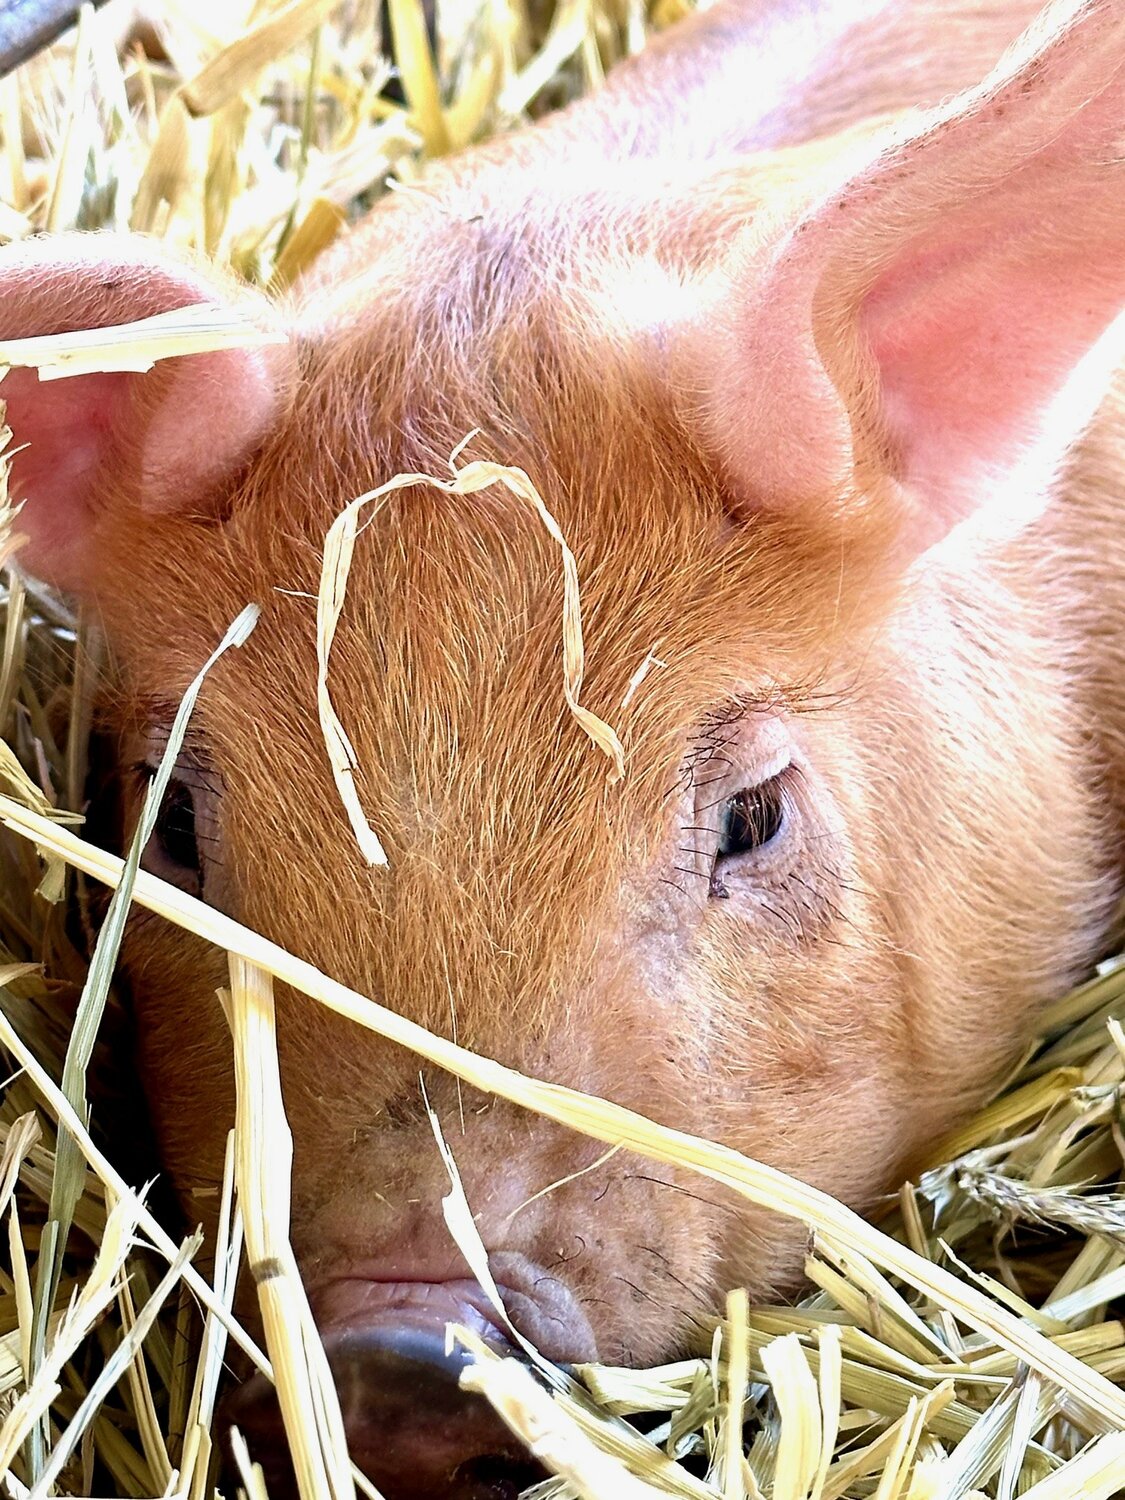 A pig rests in the hay at A-Day.